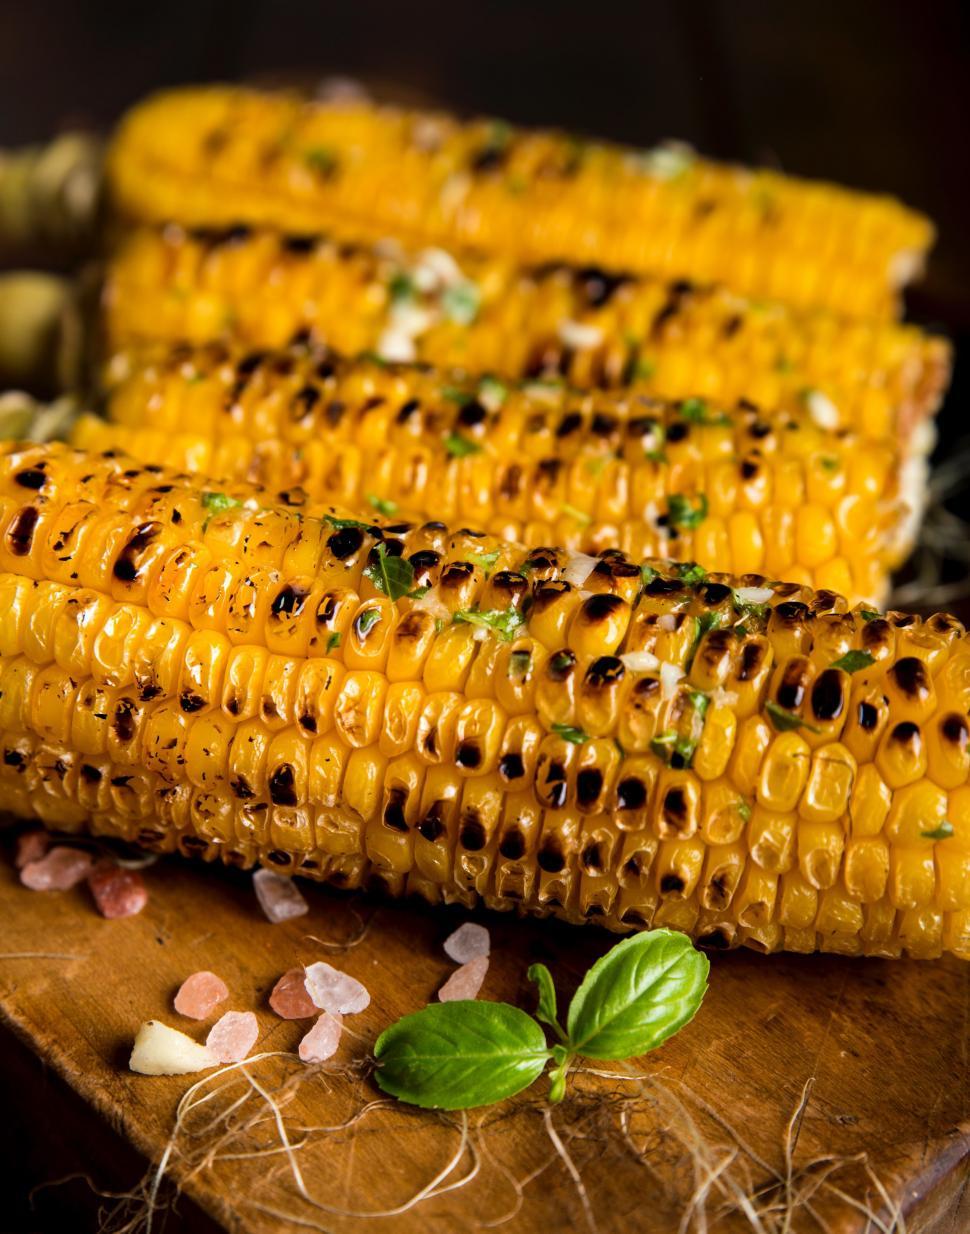 Free Image of Grilled Corn on the Cob With Herbs and Garlic 